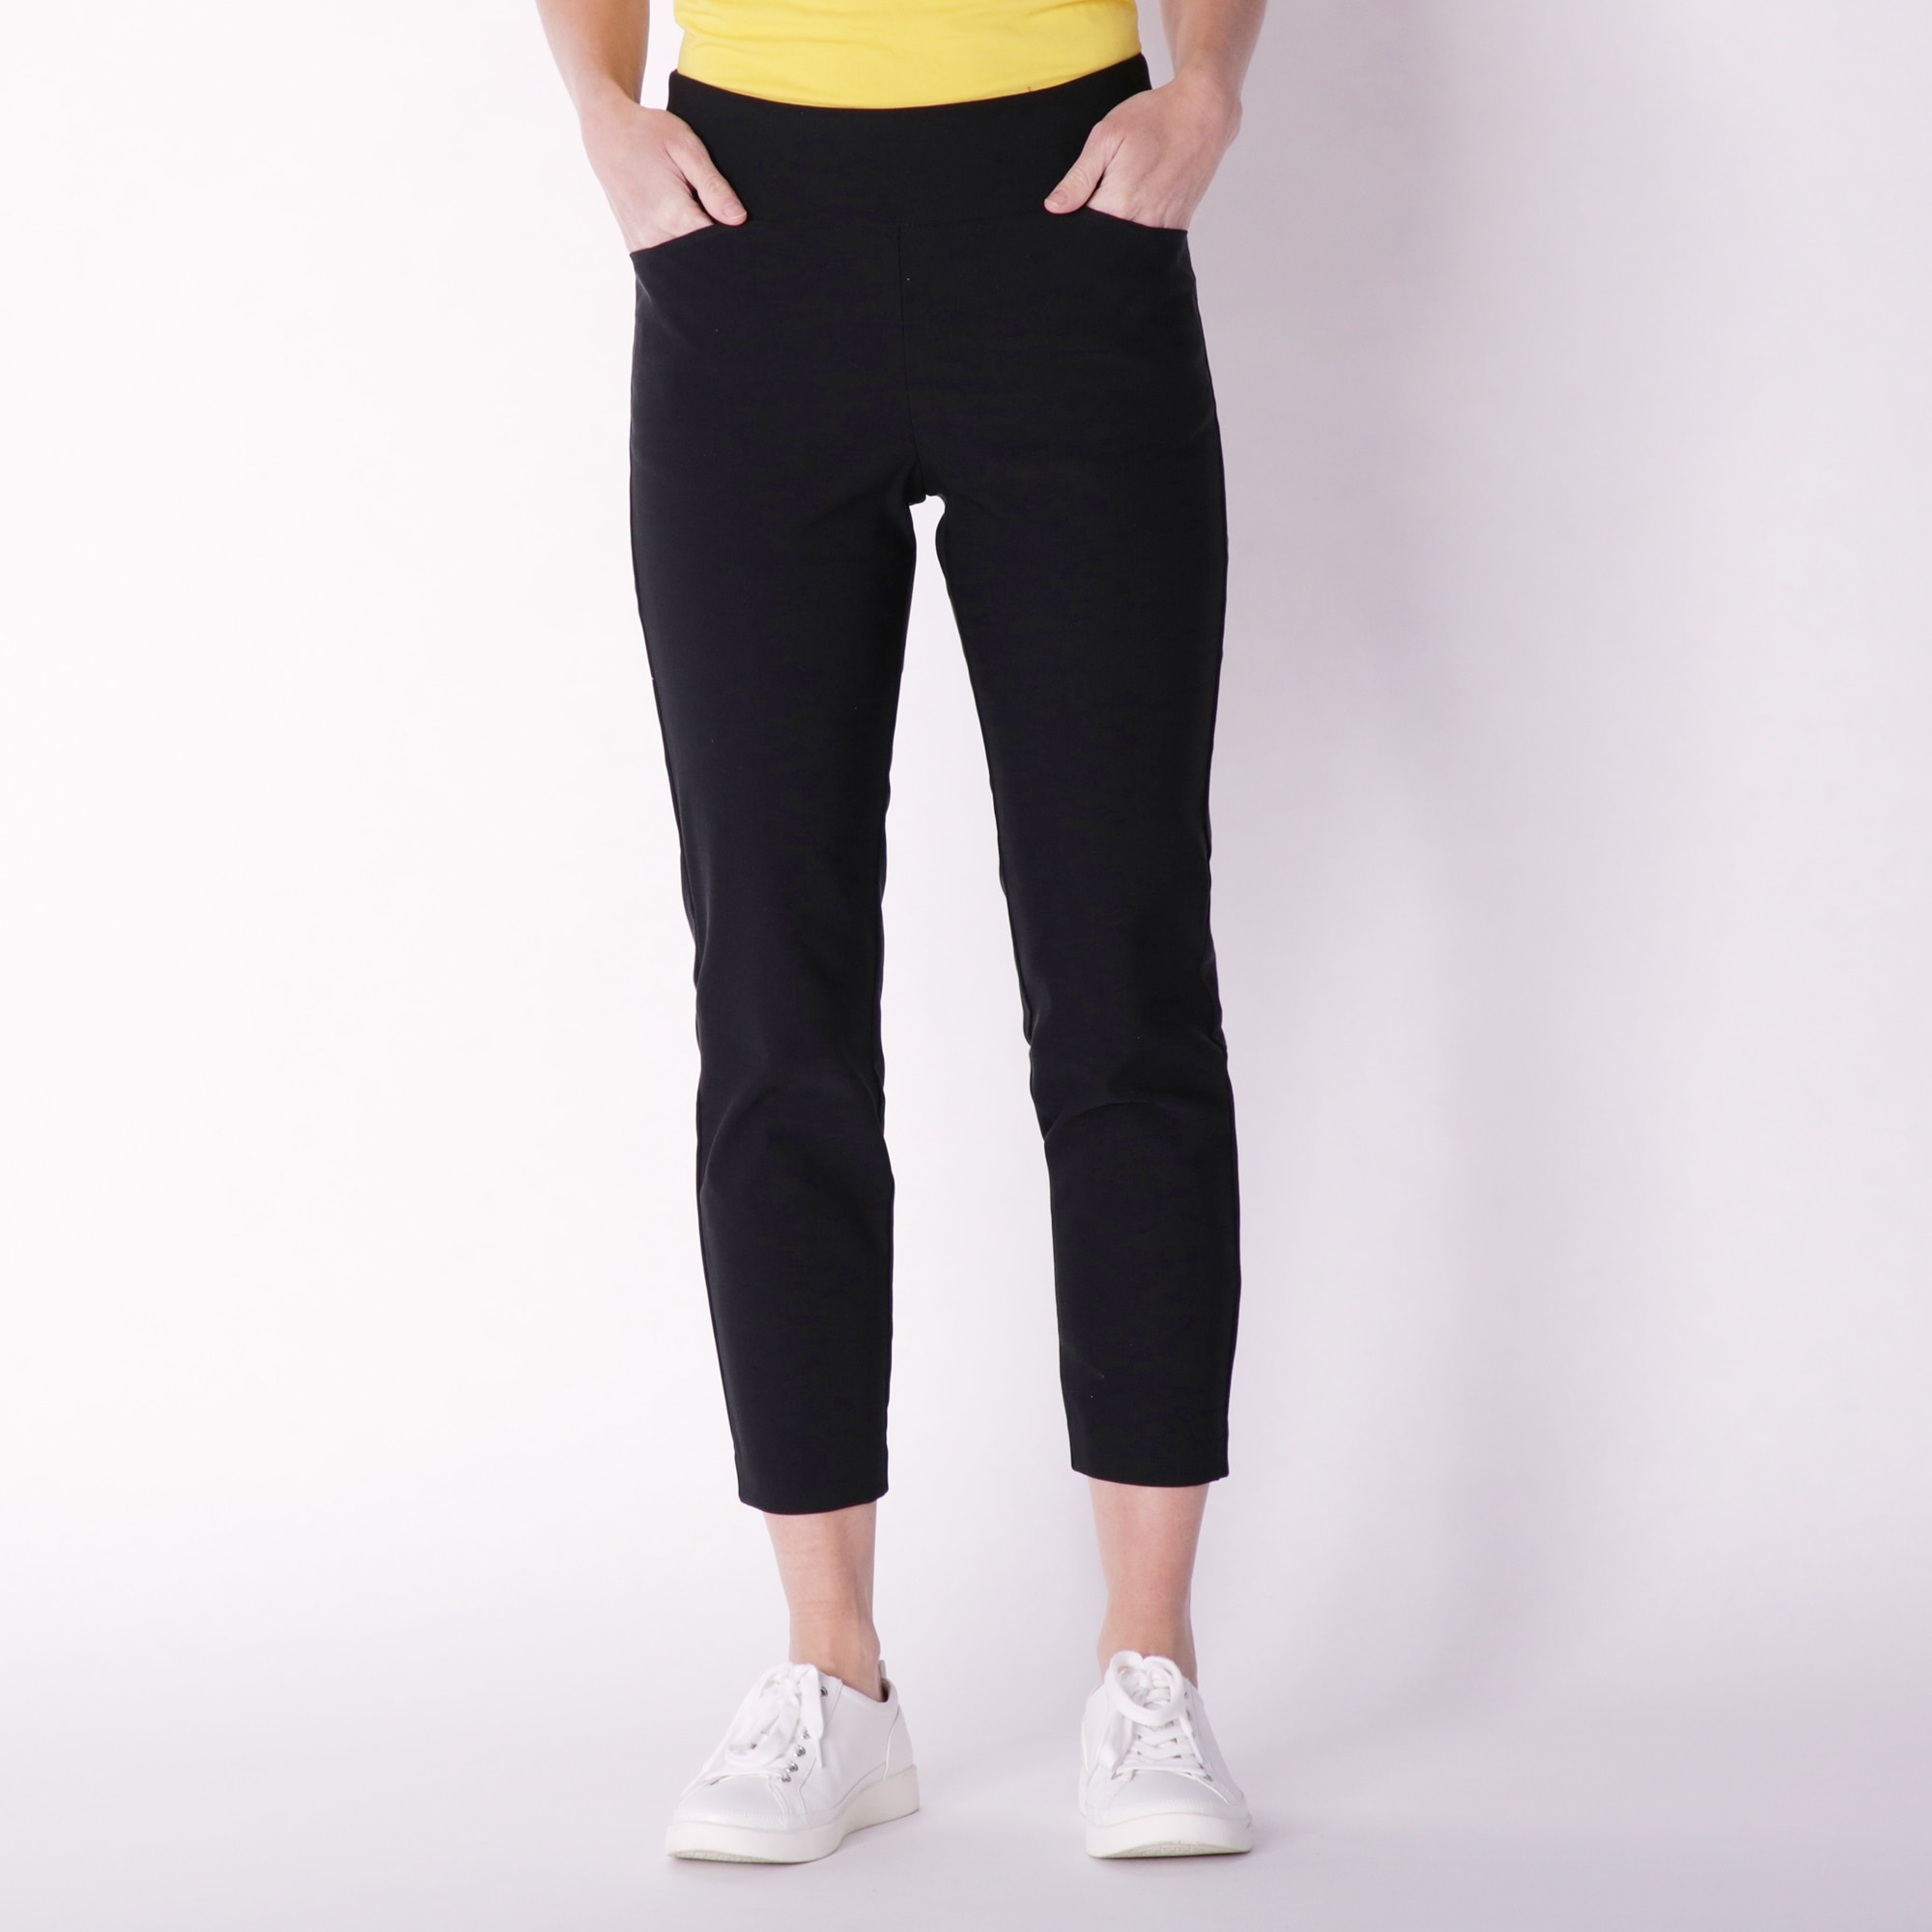 Ridgecut Women's Stretch Fit Natural-Rise Work Leggings at Tractor Supply  Co.